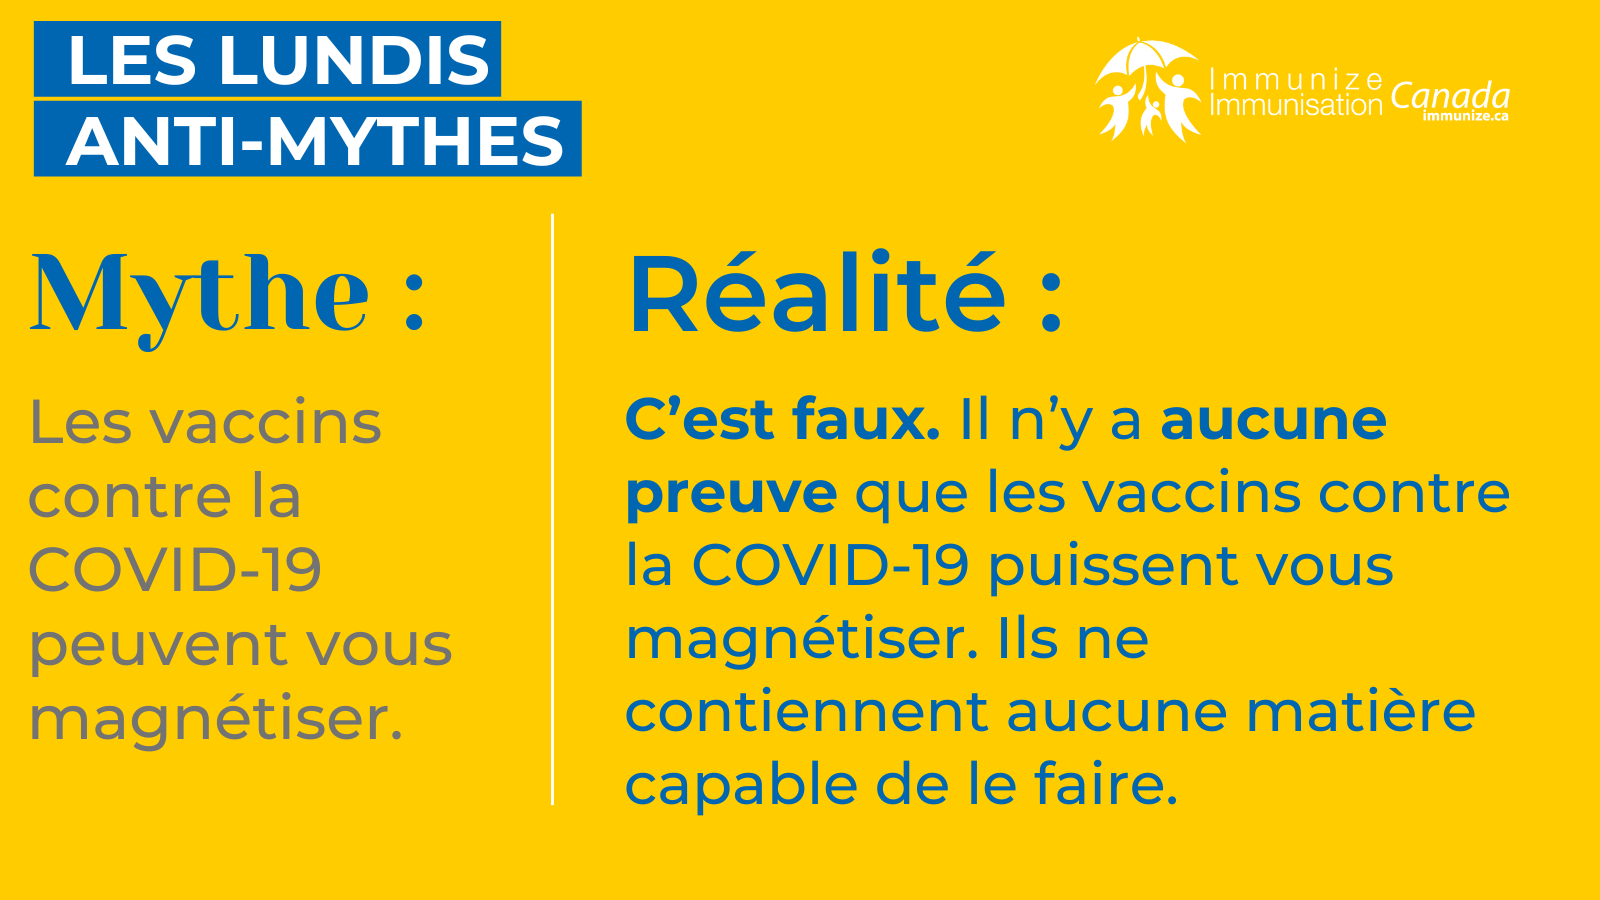 Les lundis anti-mythes - COVID-19 - image 10 pour Twitter/X